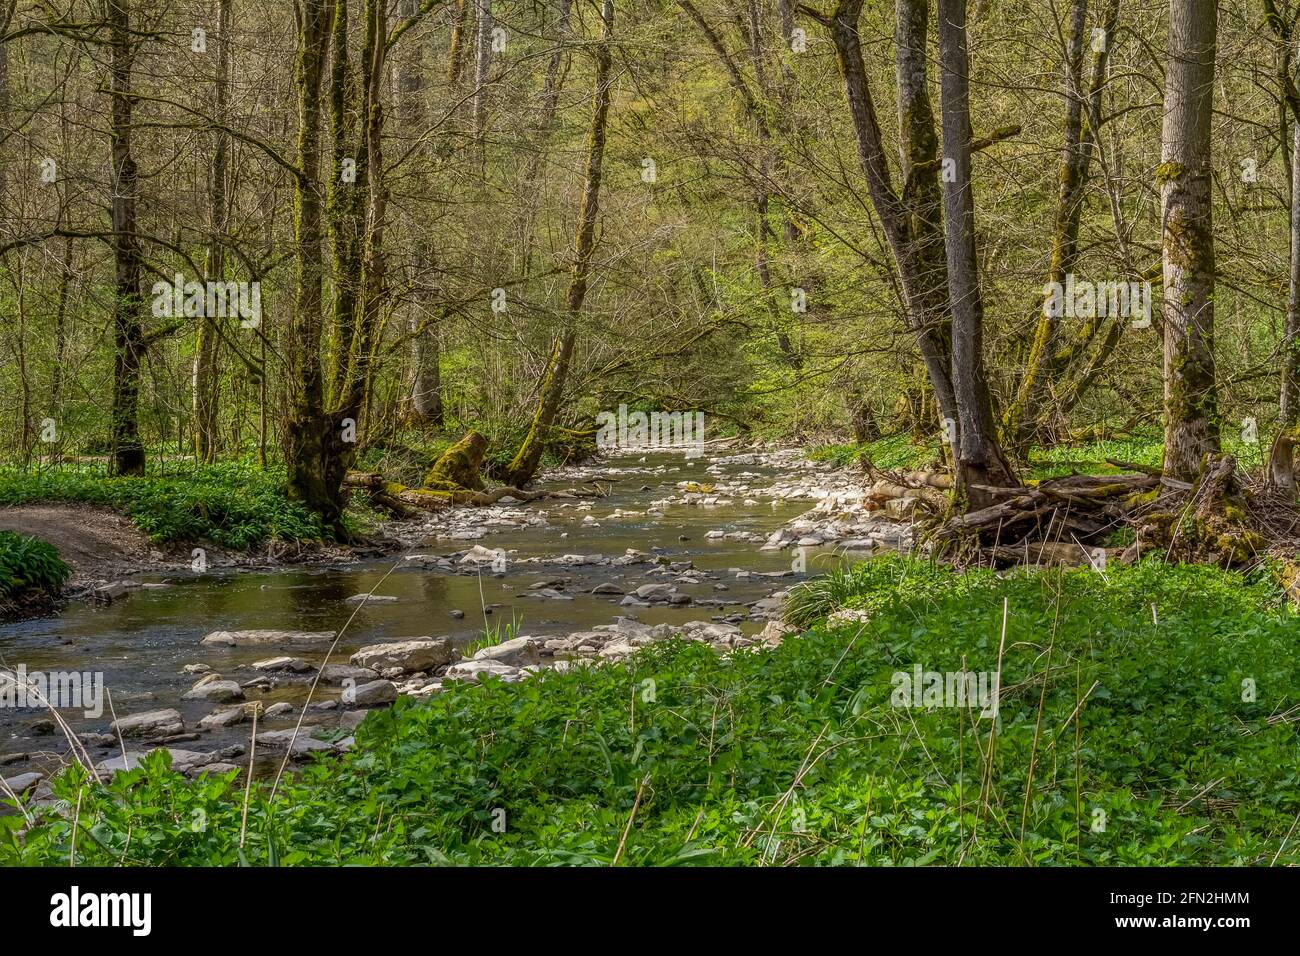 Idyllic scenery at river Kupfer in Hohenlohe, an area in Southern Germany at early spring time Stock Photo